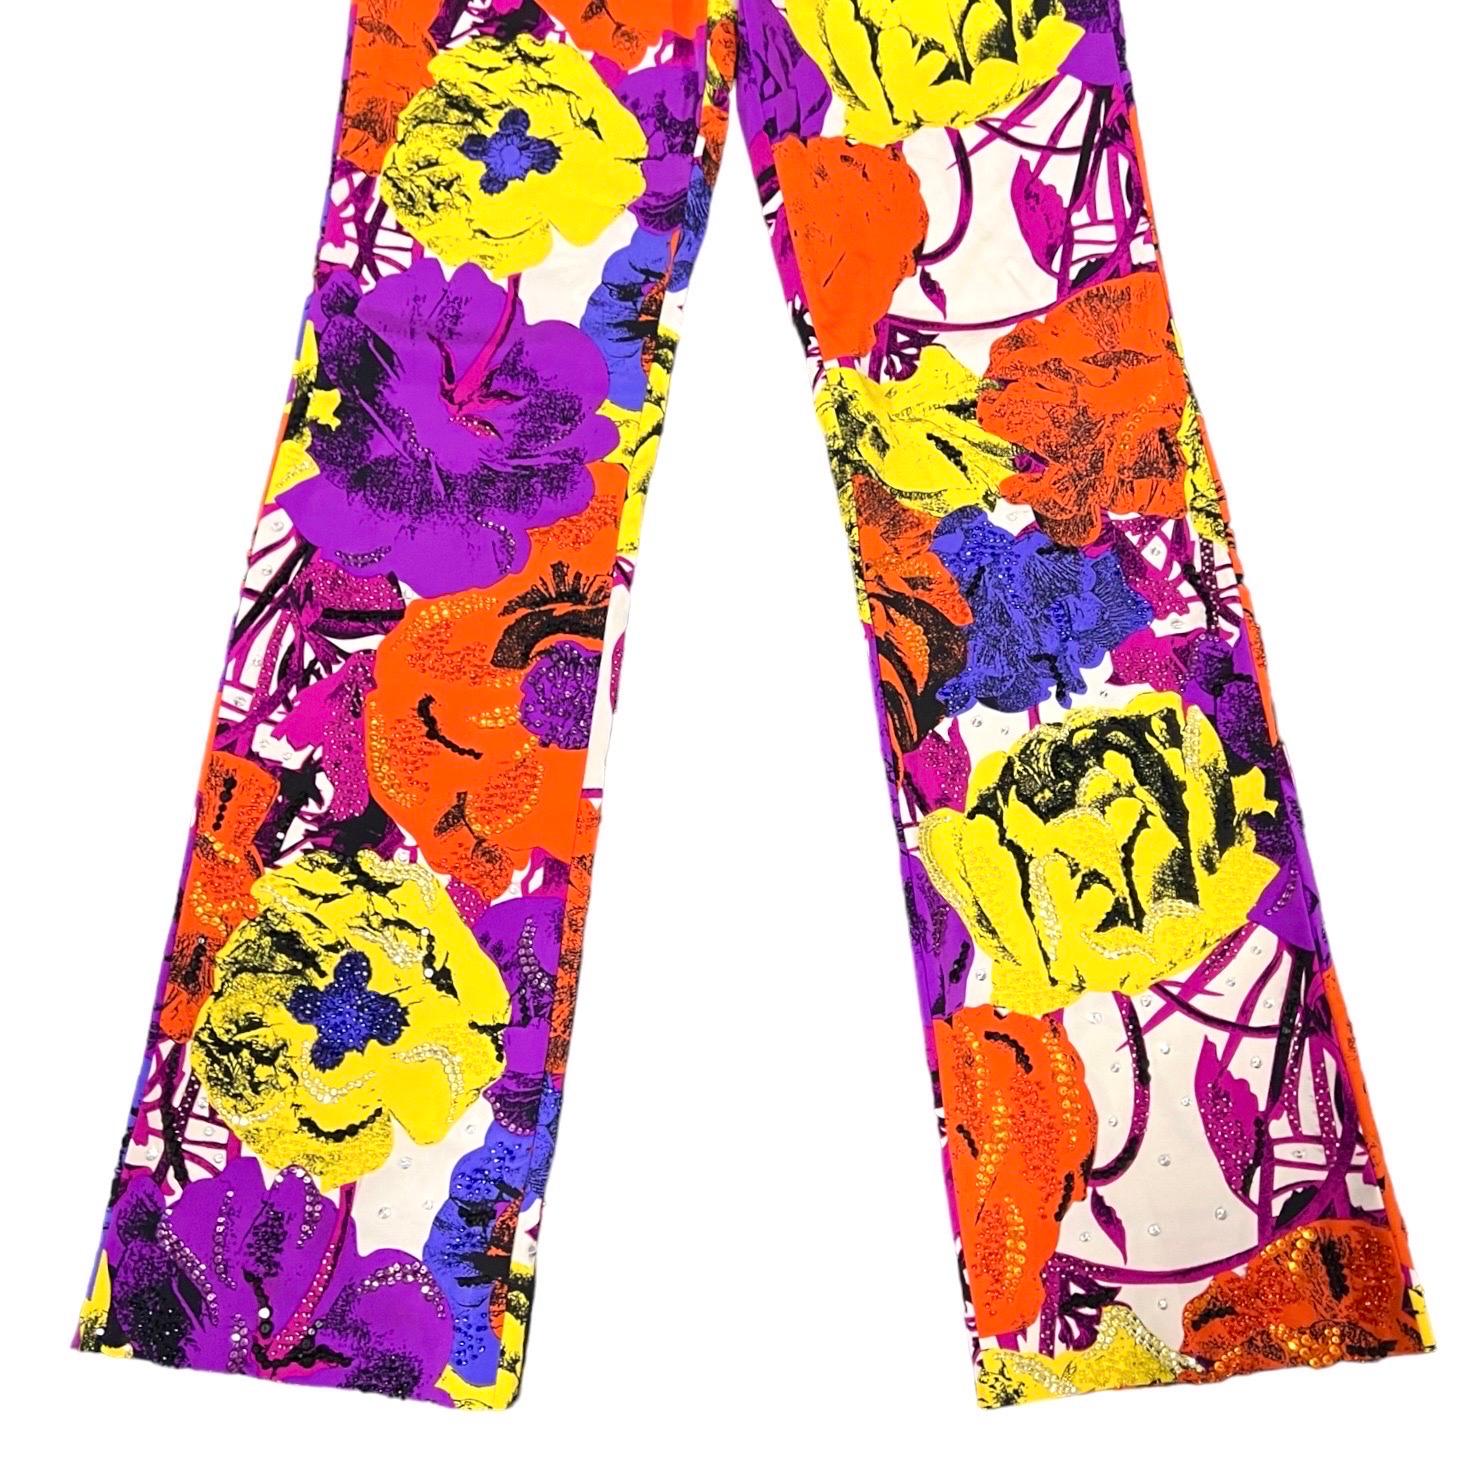 S/S 2002 Gianni Versace by Donatella Floral Beaded Runway Pants For Sale 3